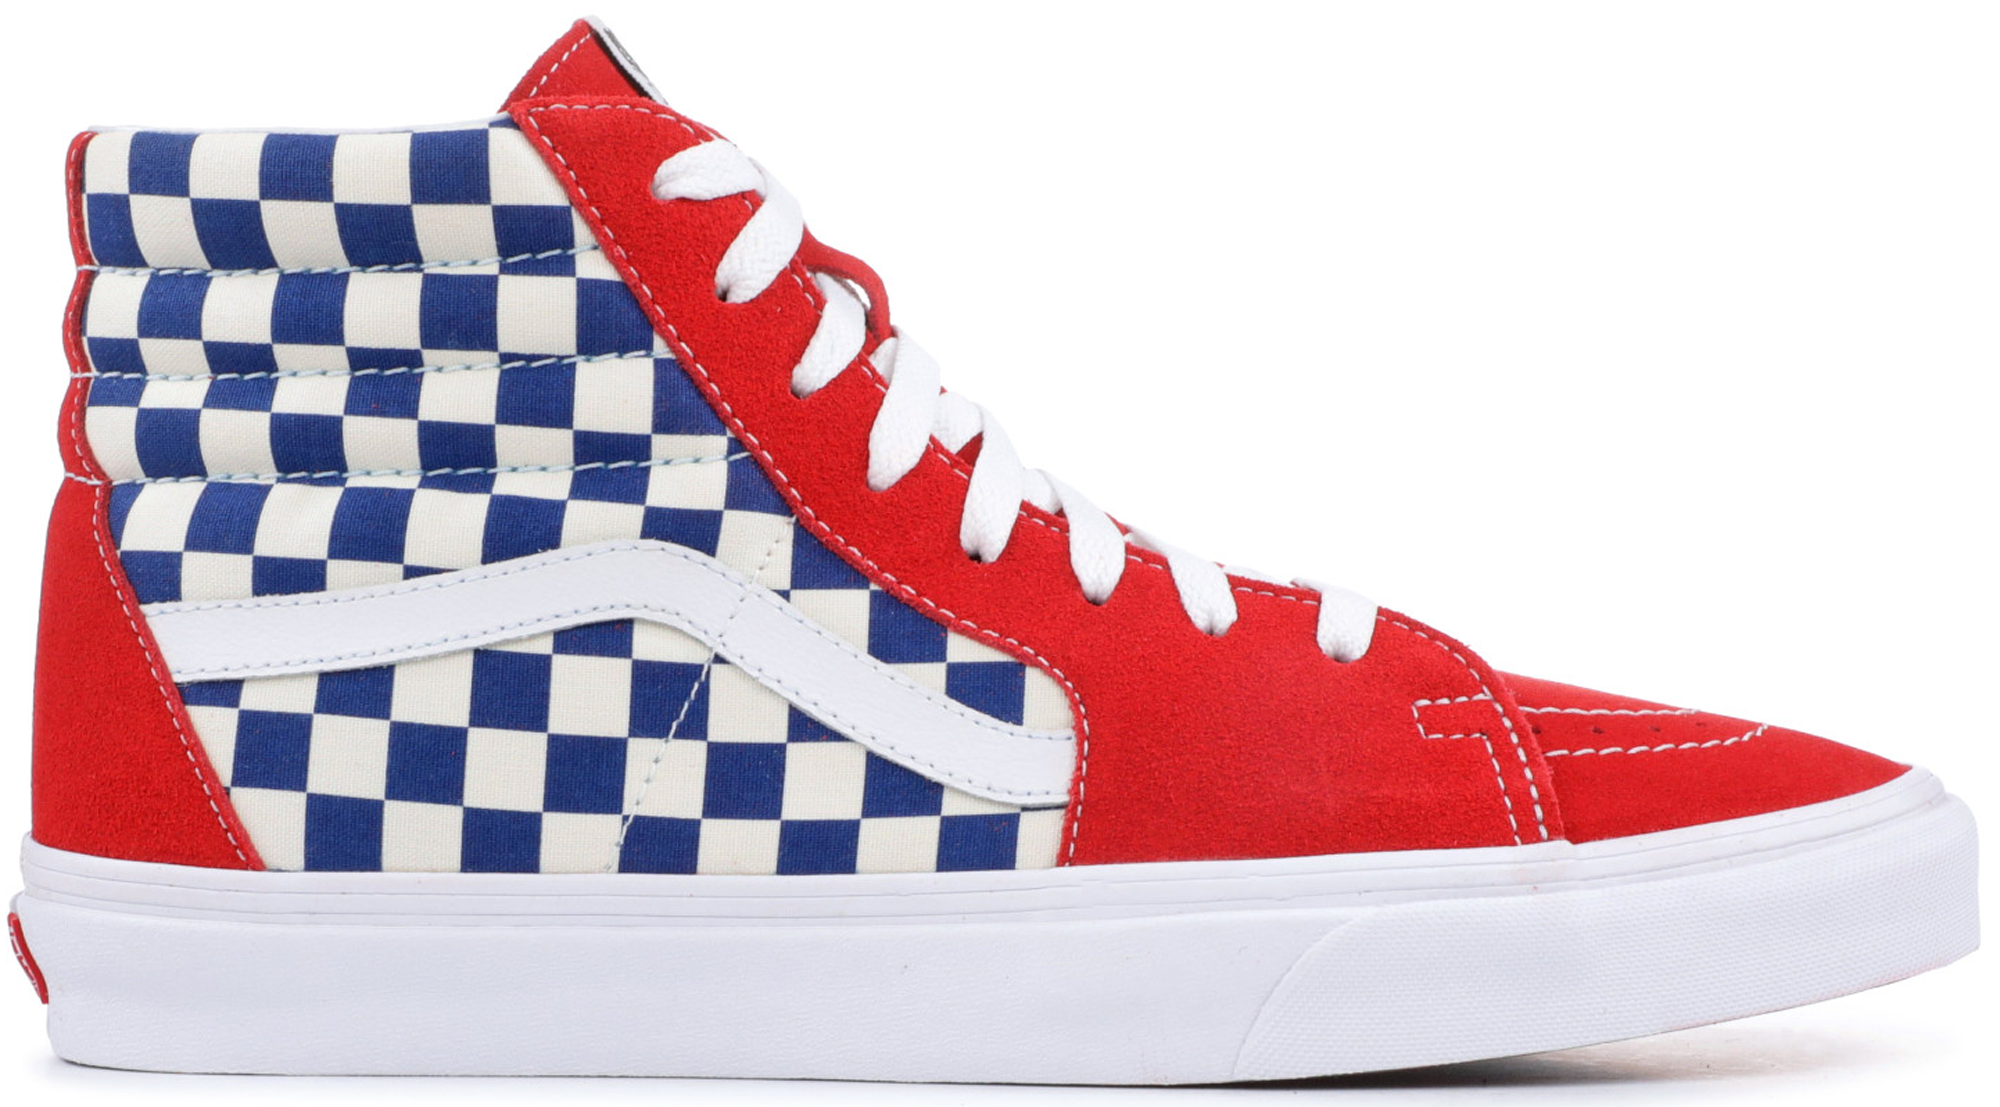 blue and red high top vans